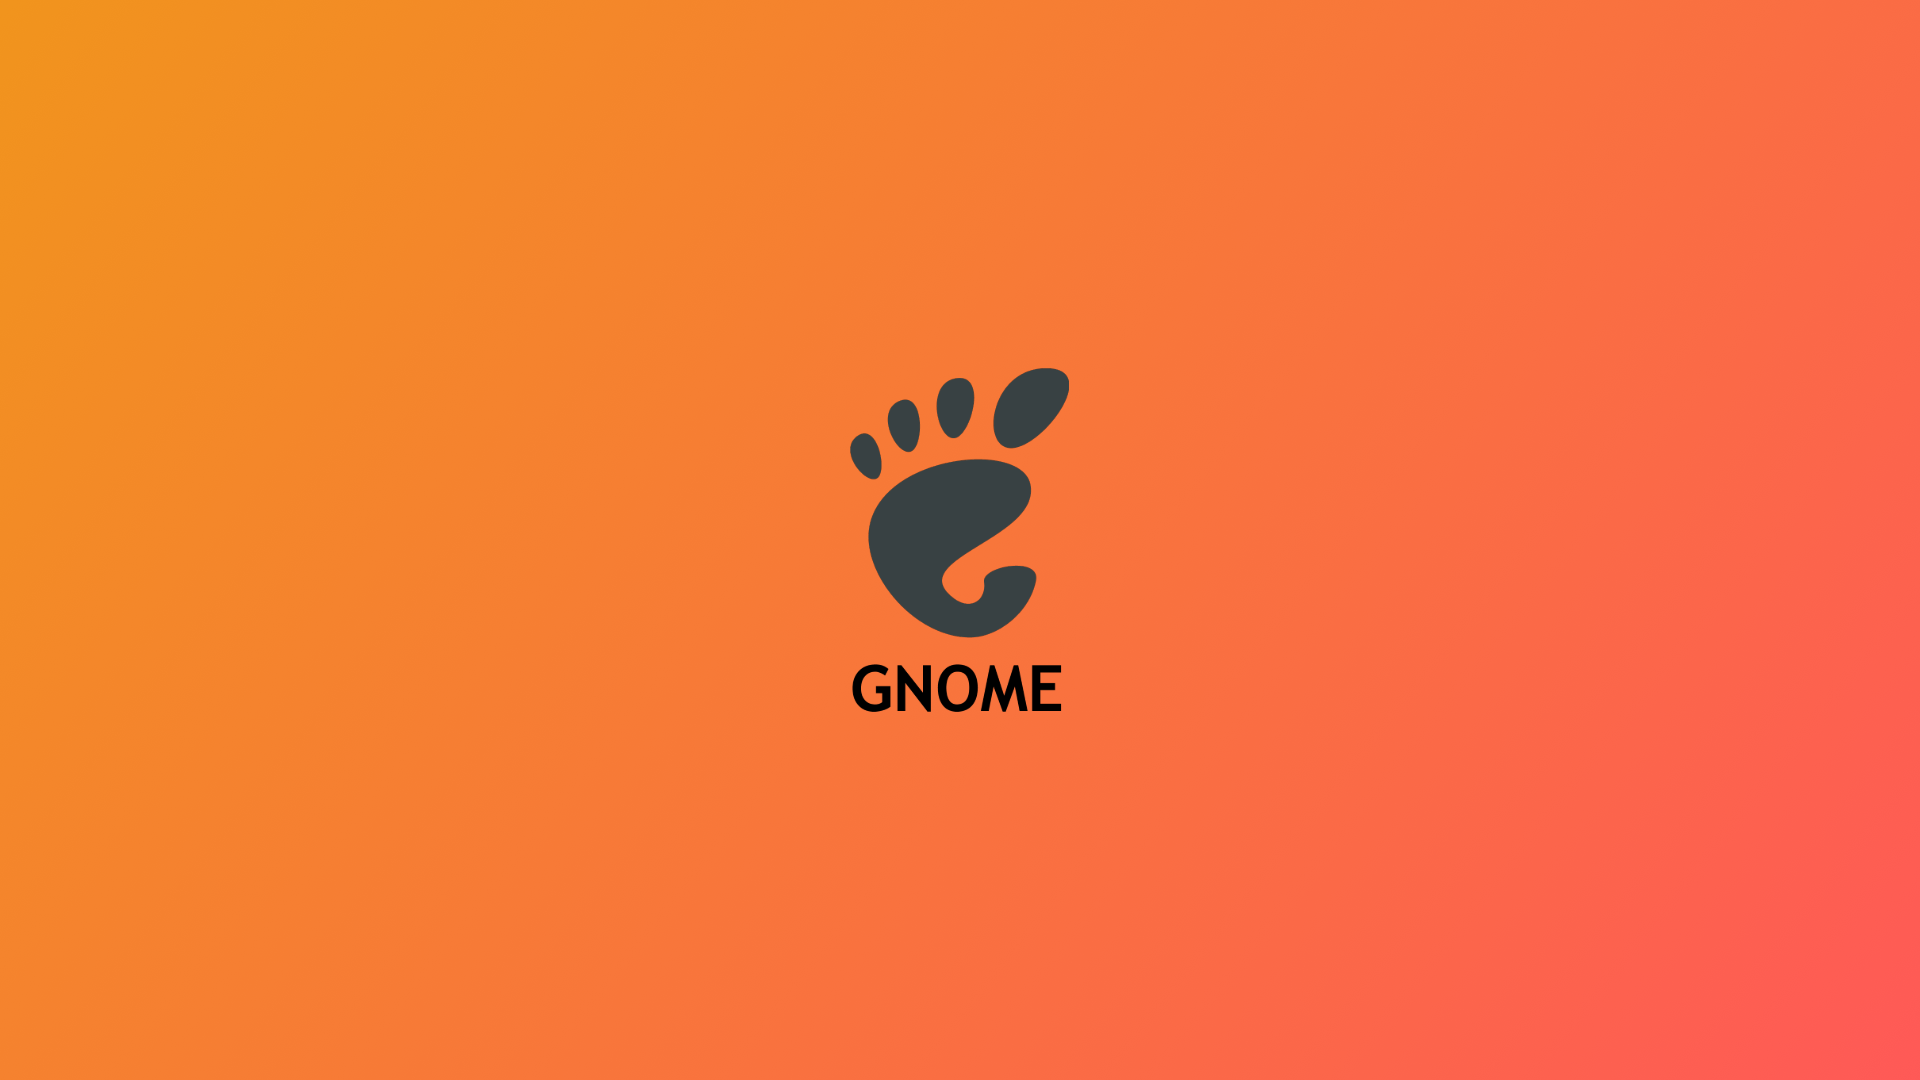 General 1920x1080 abstract GNOME orange logo Linux